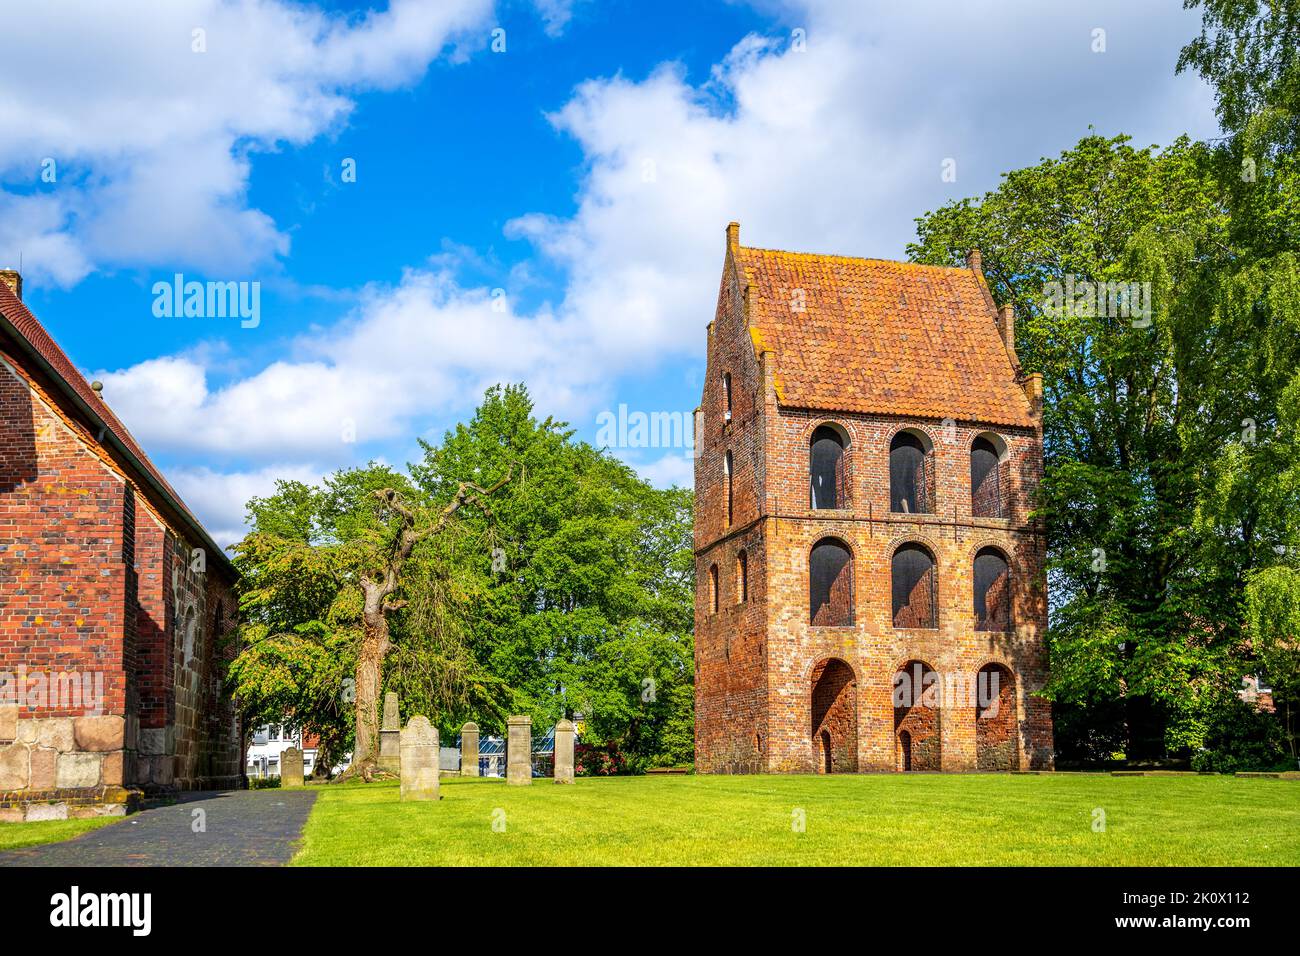 Market place panorama of Westerstede, Lower Saxony, Germany Stock Photo